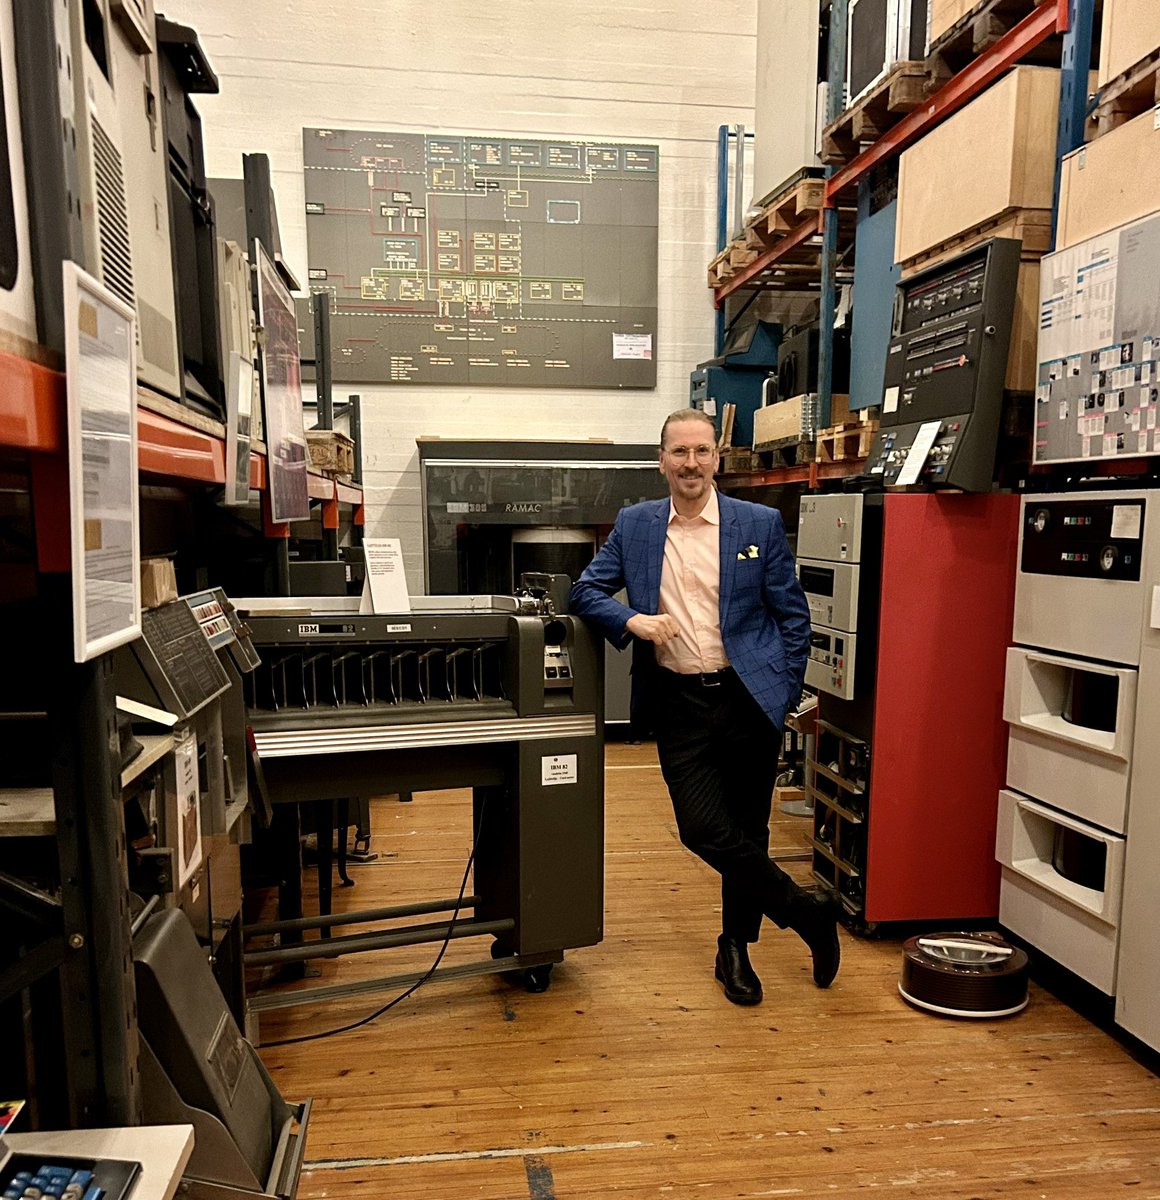 I had a chance to visit the Finnish Computer Museum in Jyväskylä. Behind me you can see a 1956 hard drive from an IBM 305 RAMAC (capacity: 5 MB).